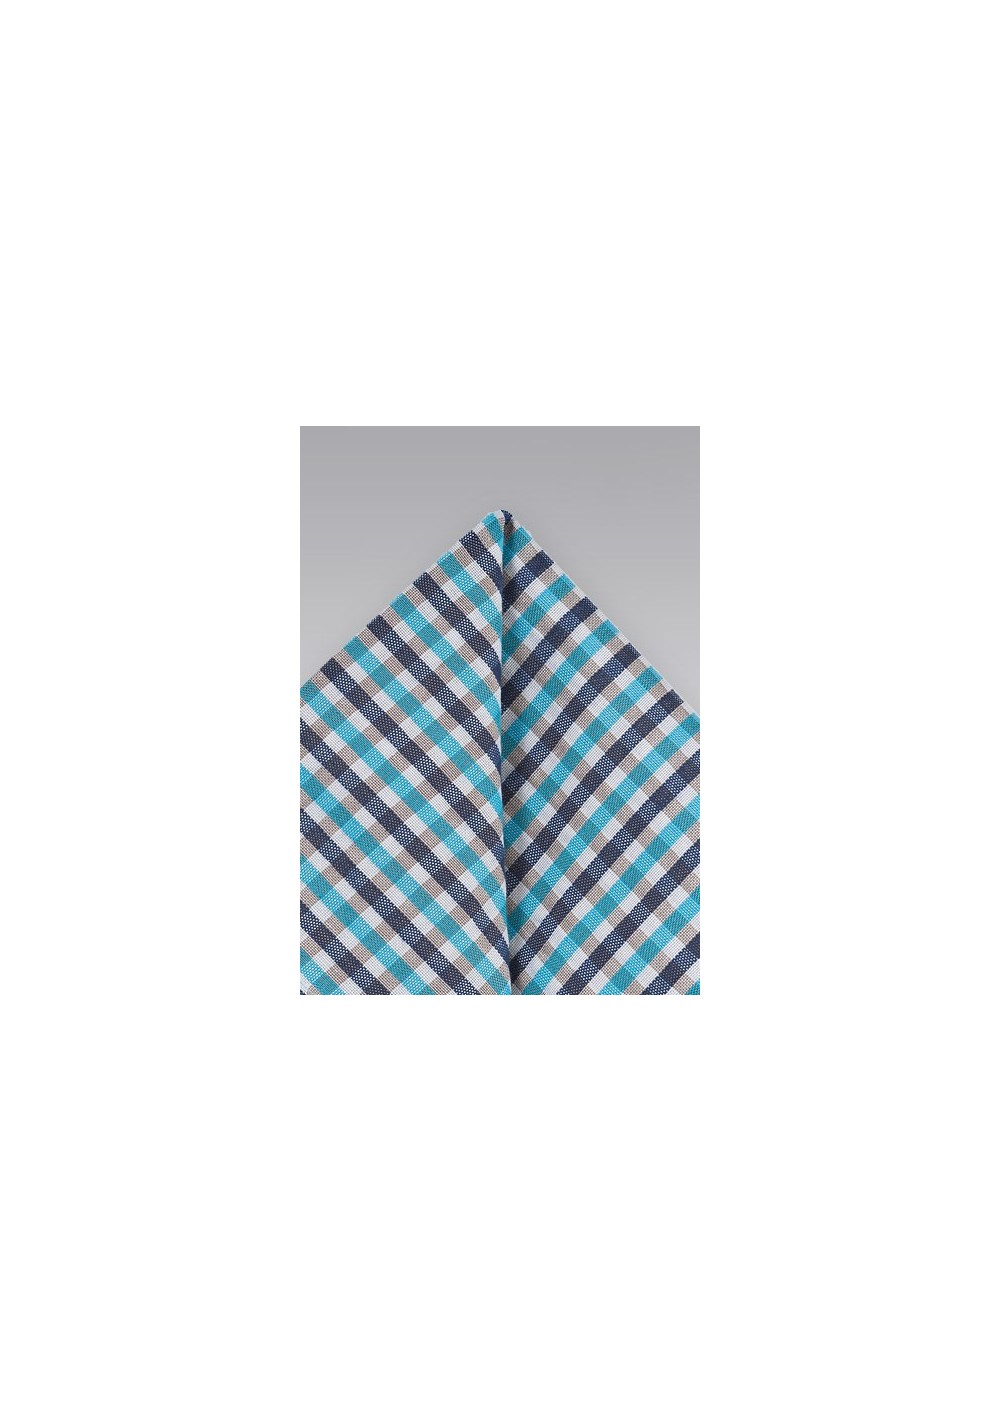 Gingham Patterned Pocket Square in Blues and Aquas